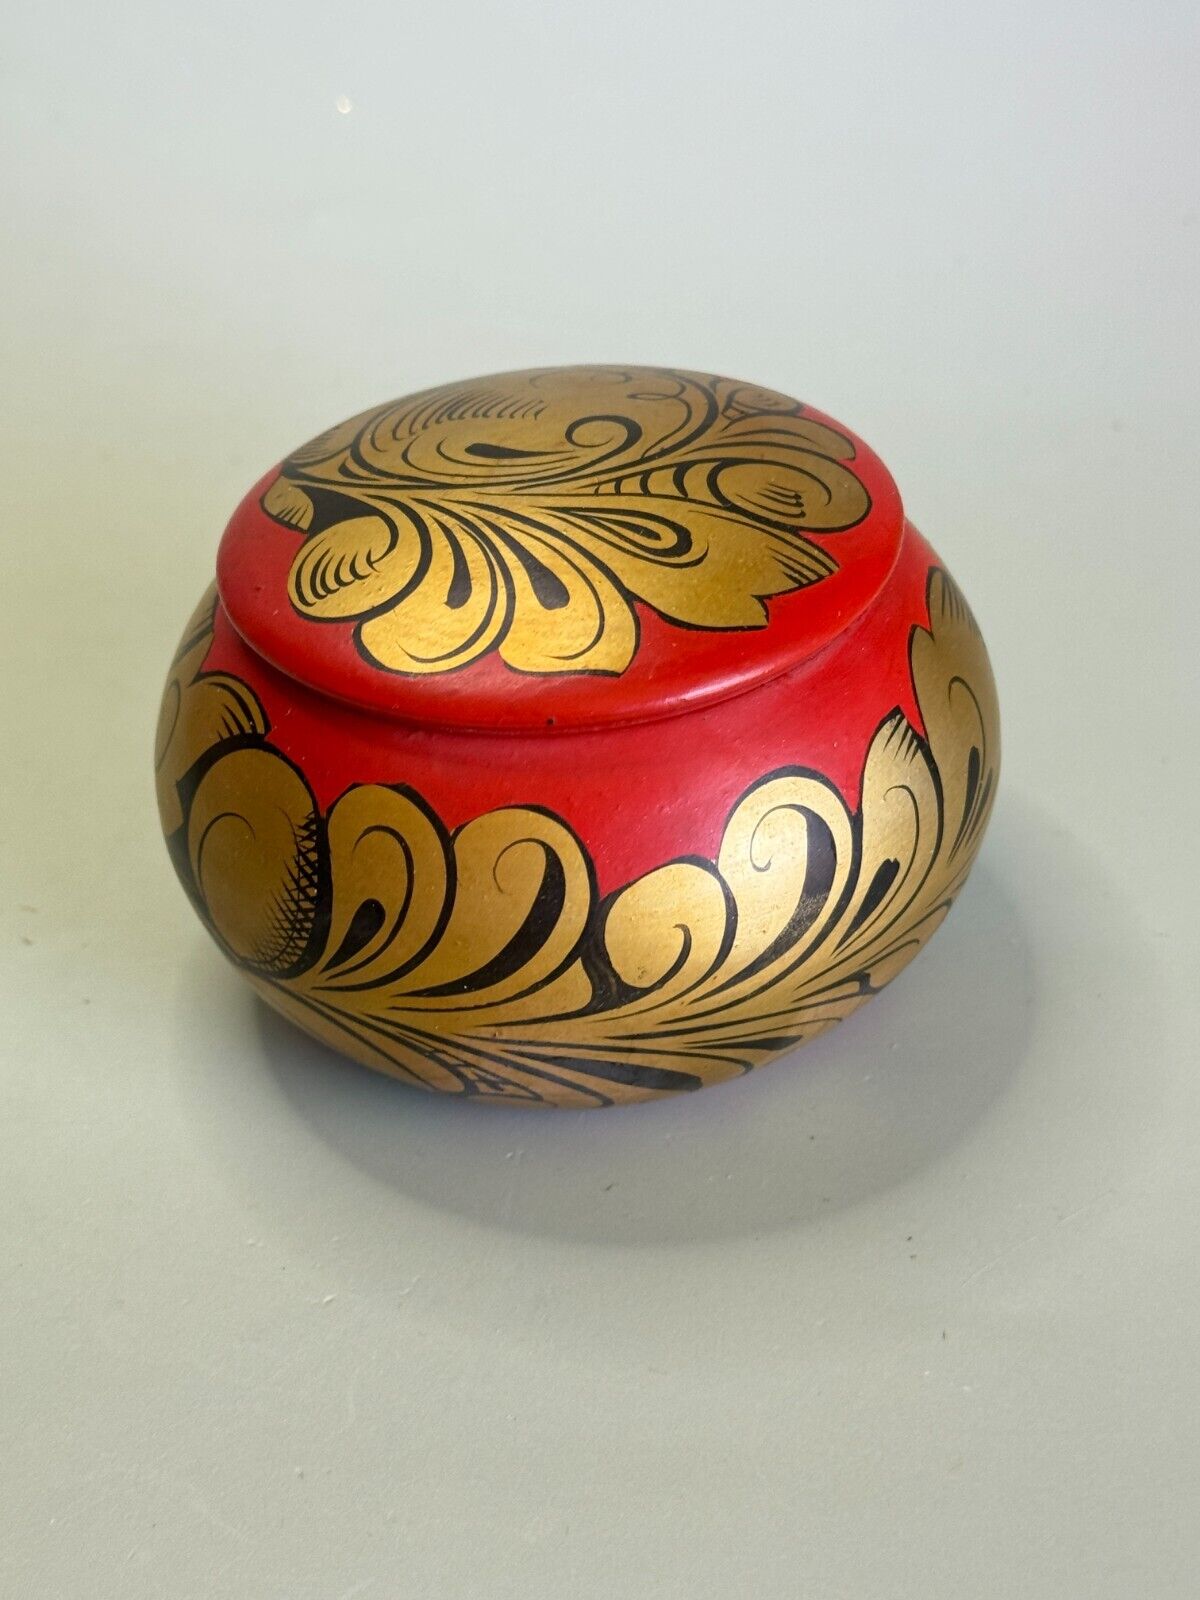 Vintage Russian Hand Painted Trinket Box Made in USSR